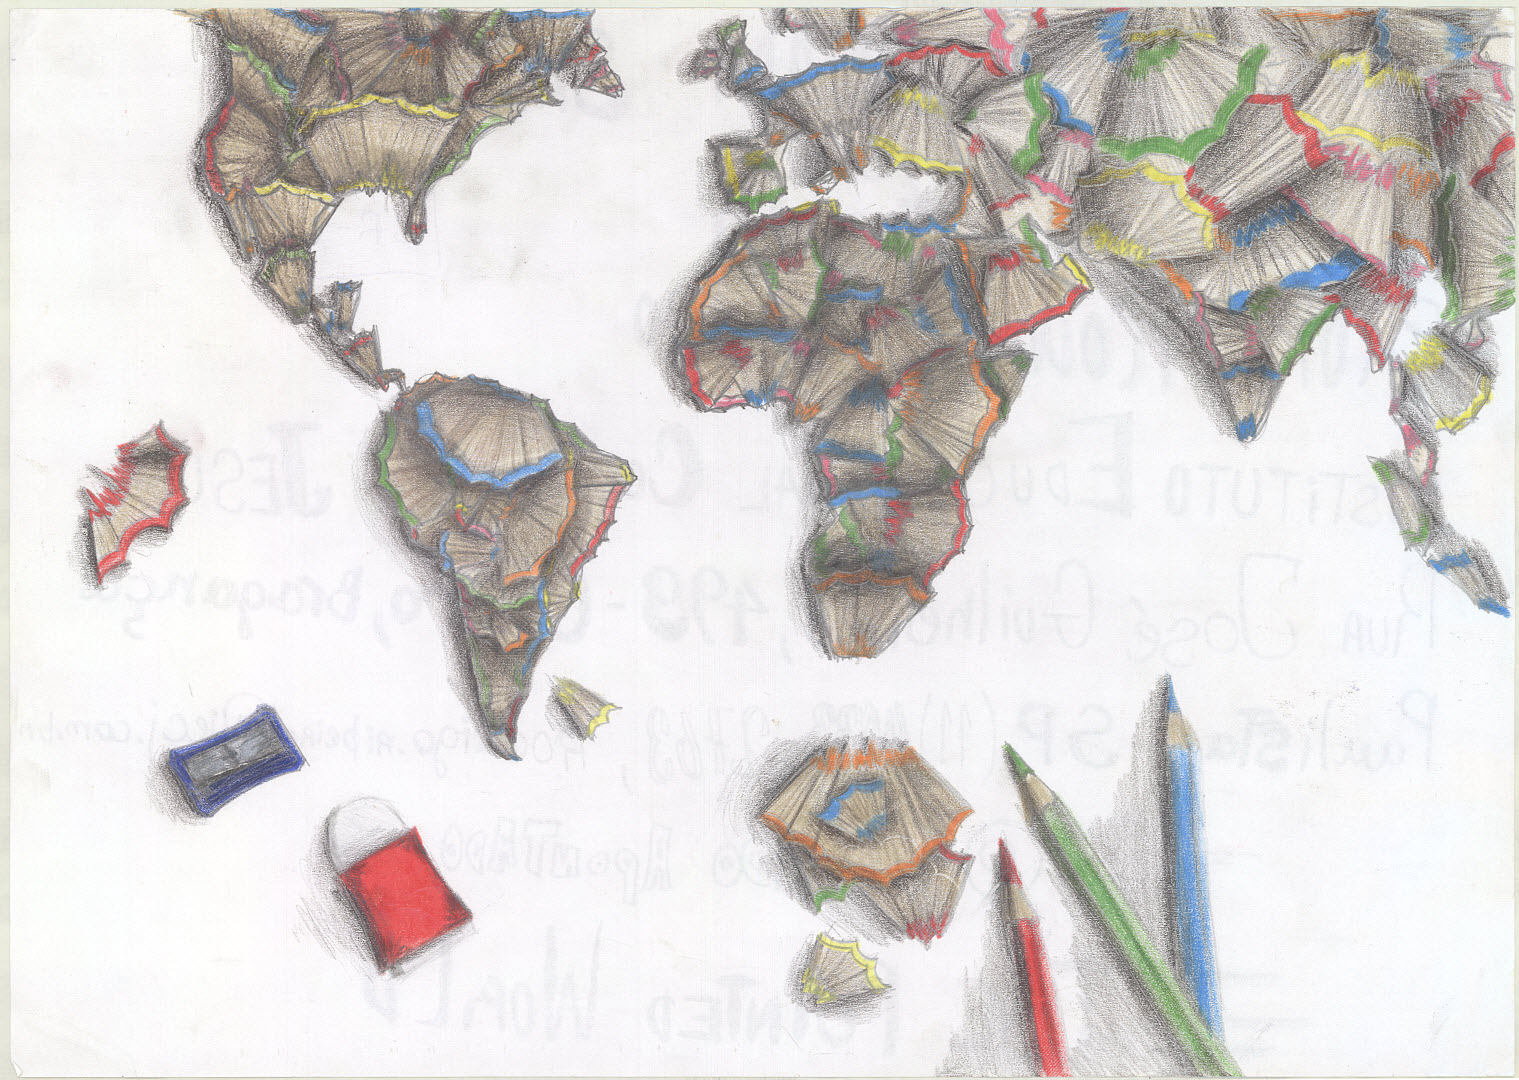 Shows all of the continents, coloured pencils outlining the borders